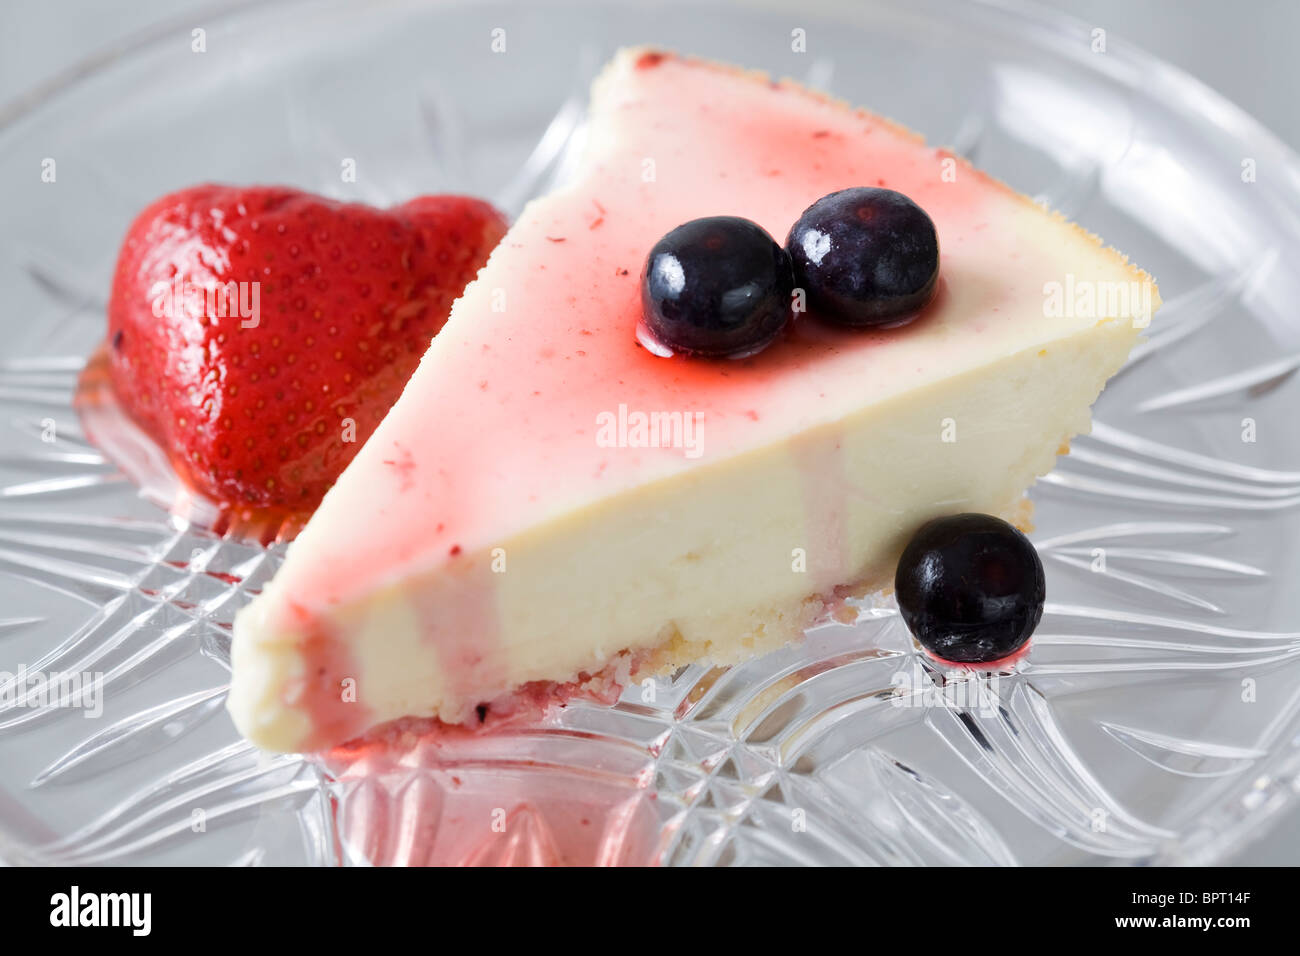 Cheesecake with strawberry and blueberries. Stock Photo